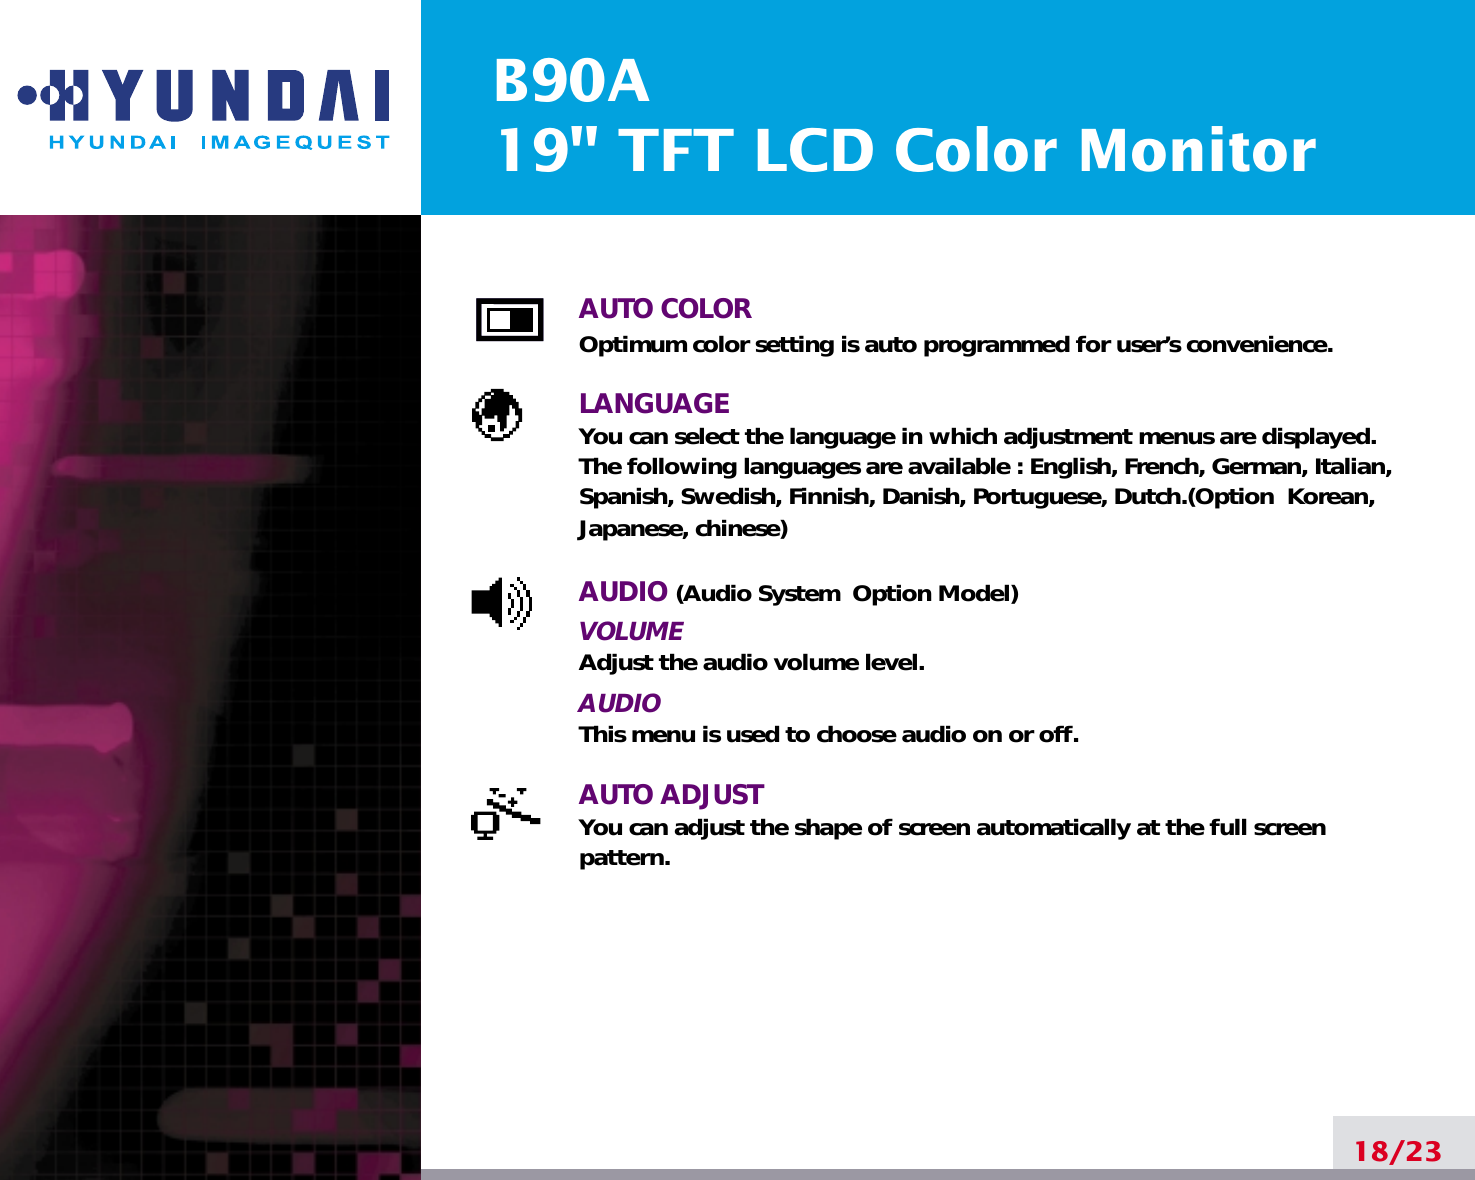 B90A19&quot; TFT LCD Color MonitorAUTO COLOROptimum color setting is auto programmed for user’s convenience.LANGUAGEYou can select the language in which adjustment menus are displayed. The following languages are available : English, French, German, Italian,Spanish, Swedish, Finnish, Danish, Portuguese, Dutch.(Option  Korean,Japanese, chinese)AUDIO (Audio System  Option Model)VOLUMEAdjust the audio volume level.AUDIOThis menu is used to choose audio on or off.AUTO ADJUSTYou can adjust the shape of screen automatically at the full screenpattern.18/23